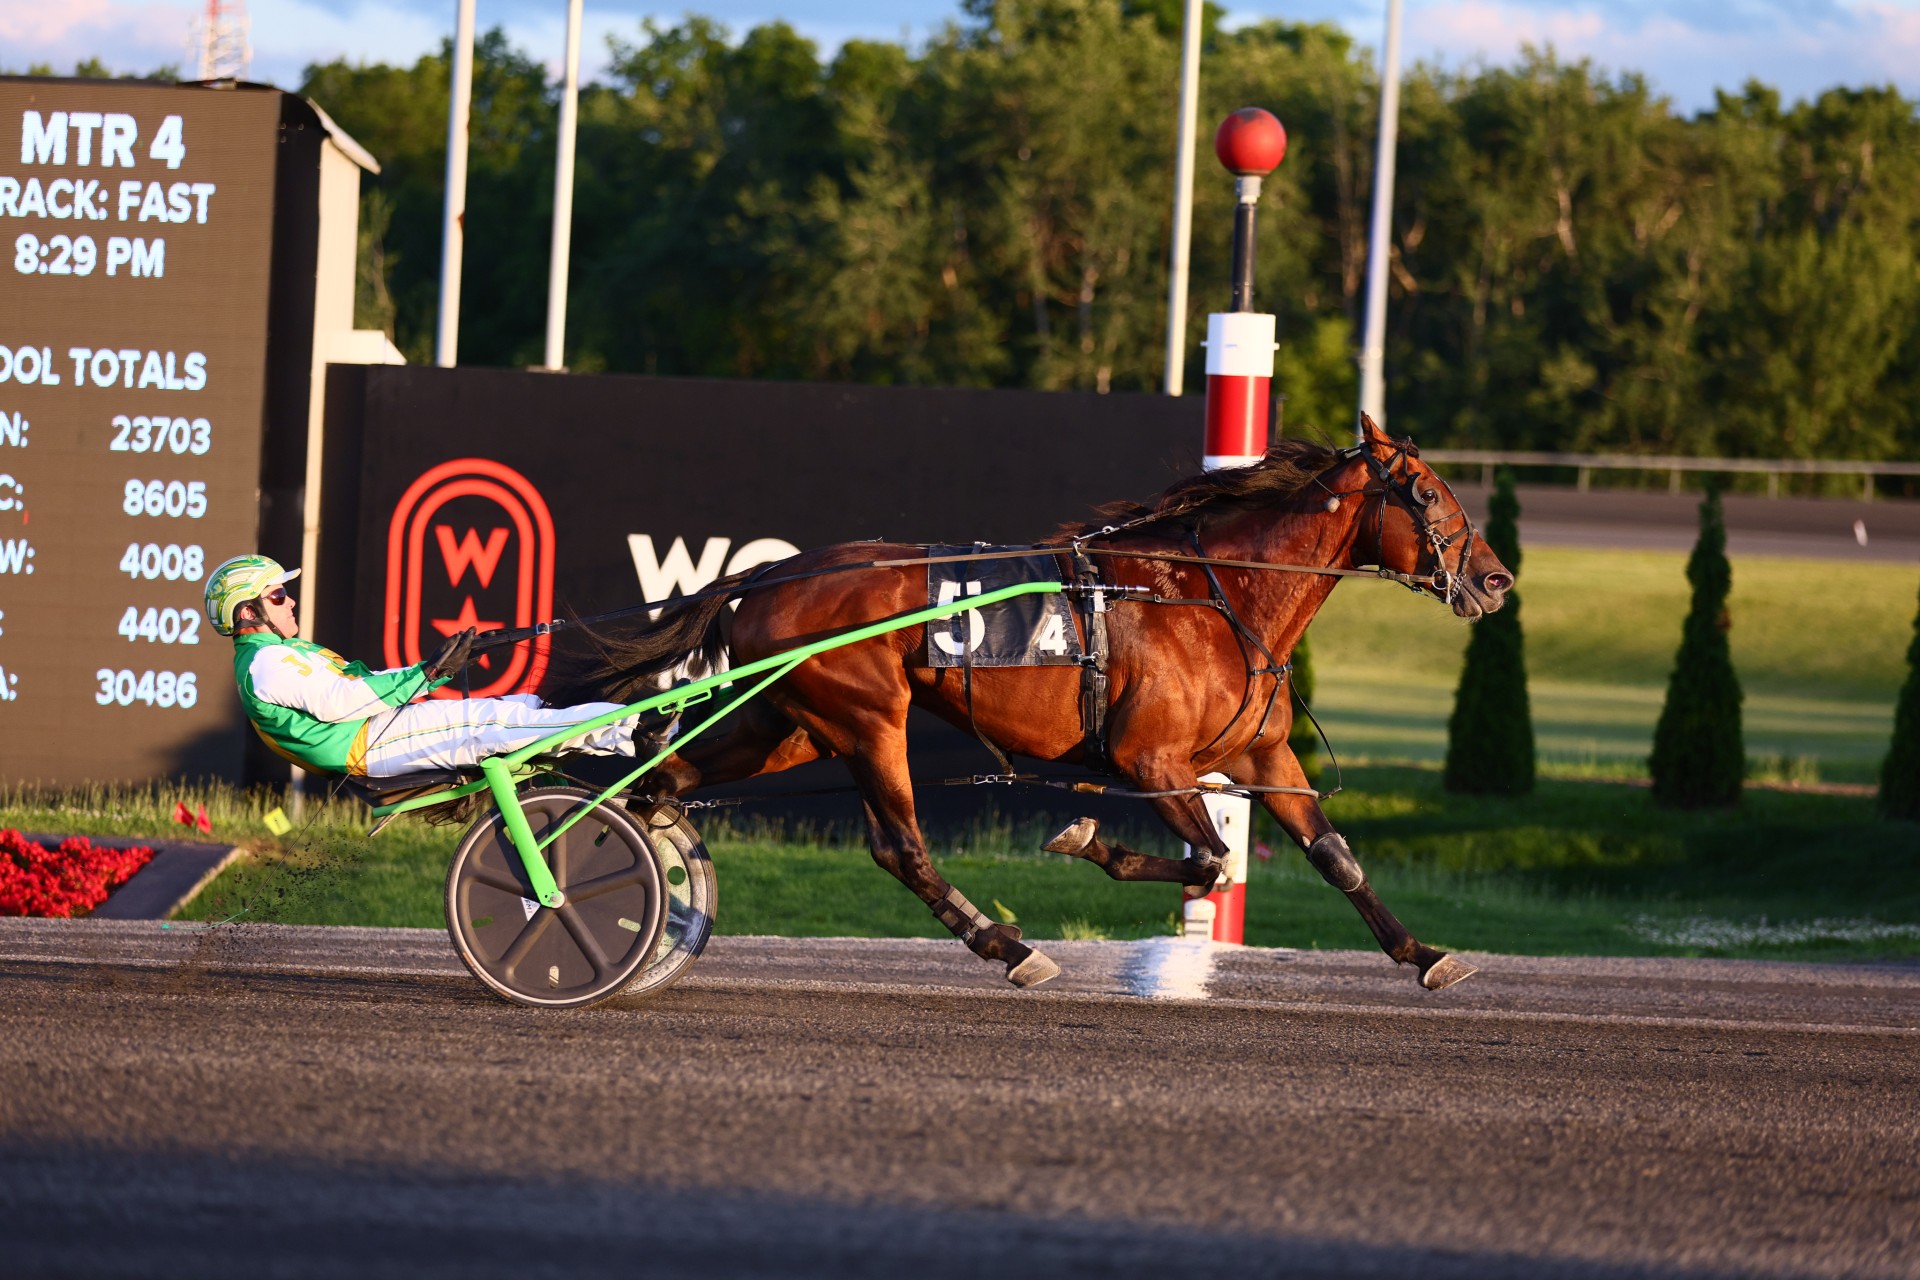 Myretirementdream won the first $95,000 OSS Gold Series race for three-year-old trotting colts on June 27 at Woodbine Mohawk Park (Clive Cohen/New Image Media)